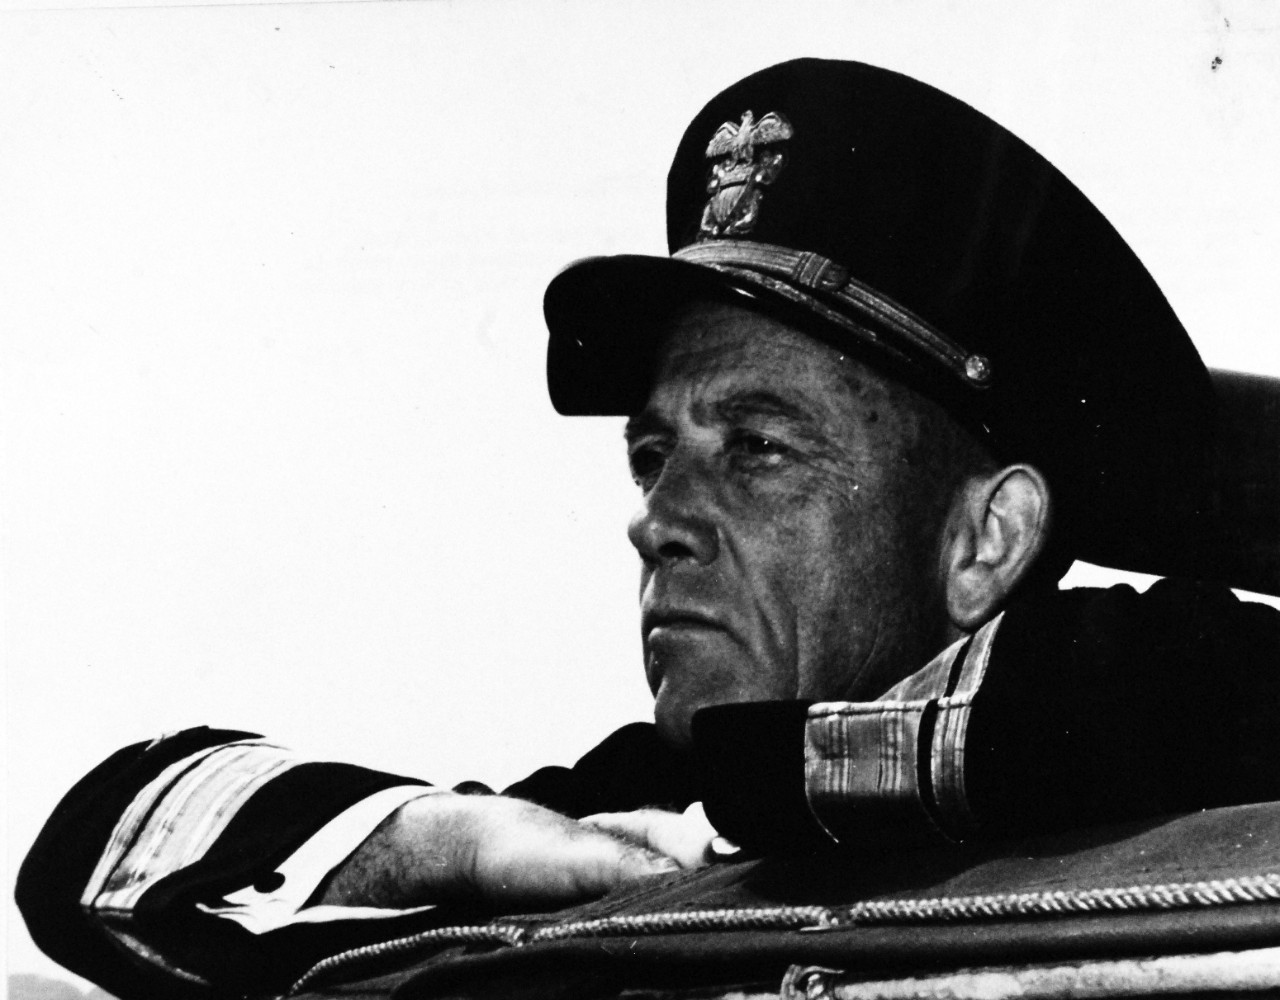 80-G-45681:   Rear Admiral Alan G. Kirk, USN, Commander, U.S. Task Forces, operating as part of the combined Naval Force in England, watches his men during the invasion of Europe.   Photograph released 8 June 1944.  Official U.S. Navy Photograph, now in the collections of the National Archives.  (2014/9/9).  